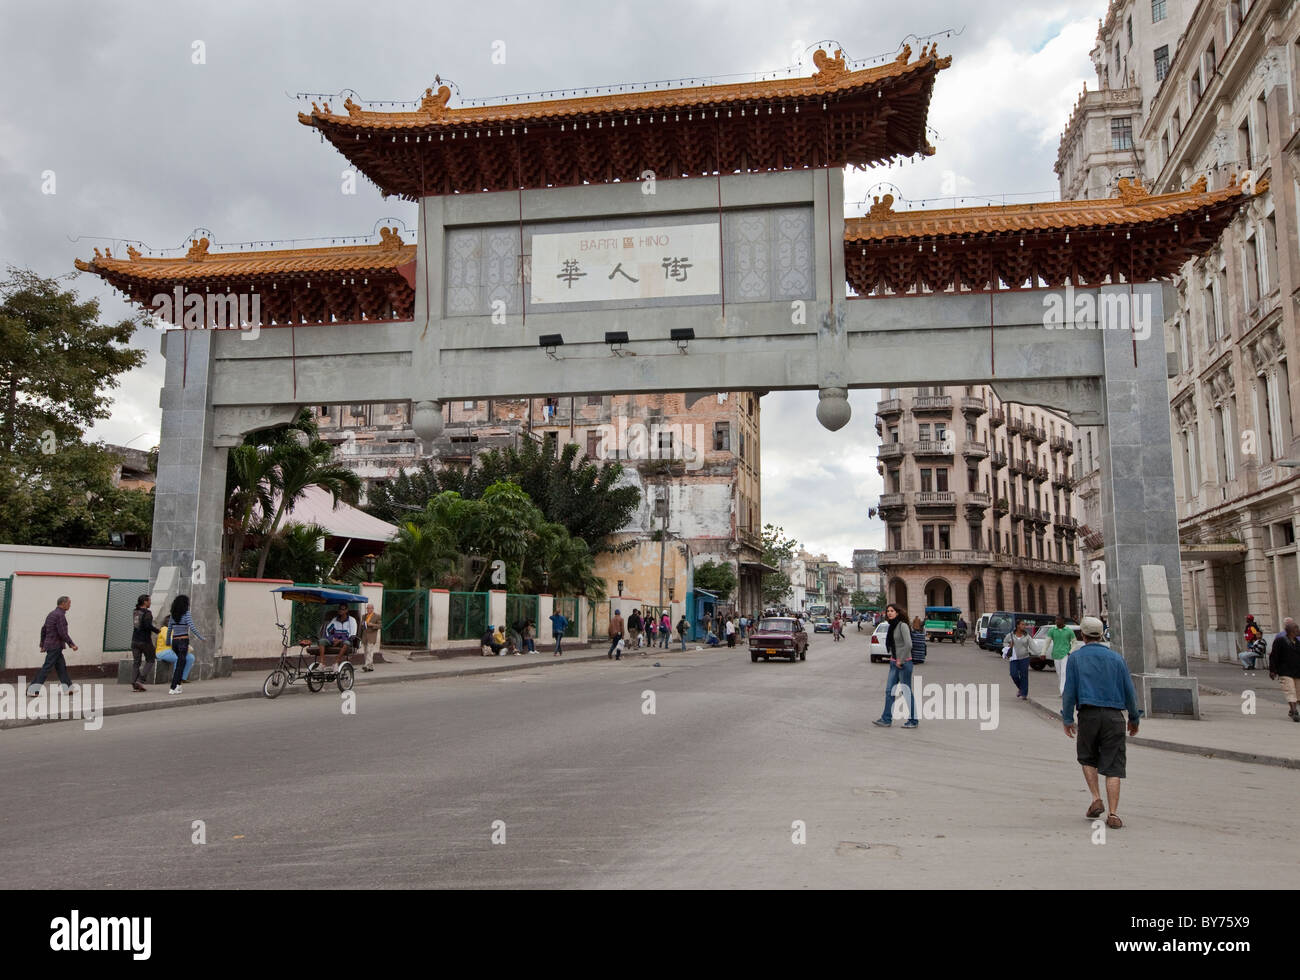 Cuba, Havana. Gate Marking Entrance to China Town. Gift of the People's Republic of China. Stock Photo